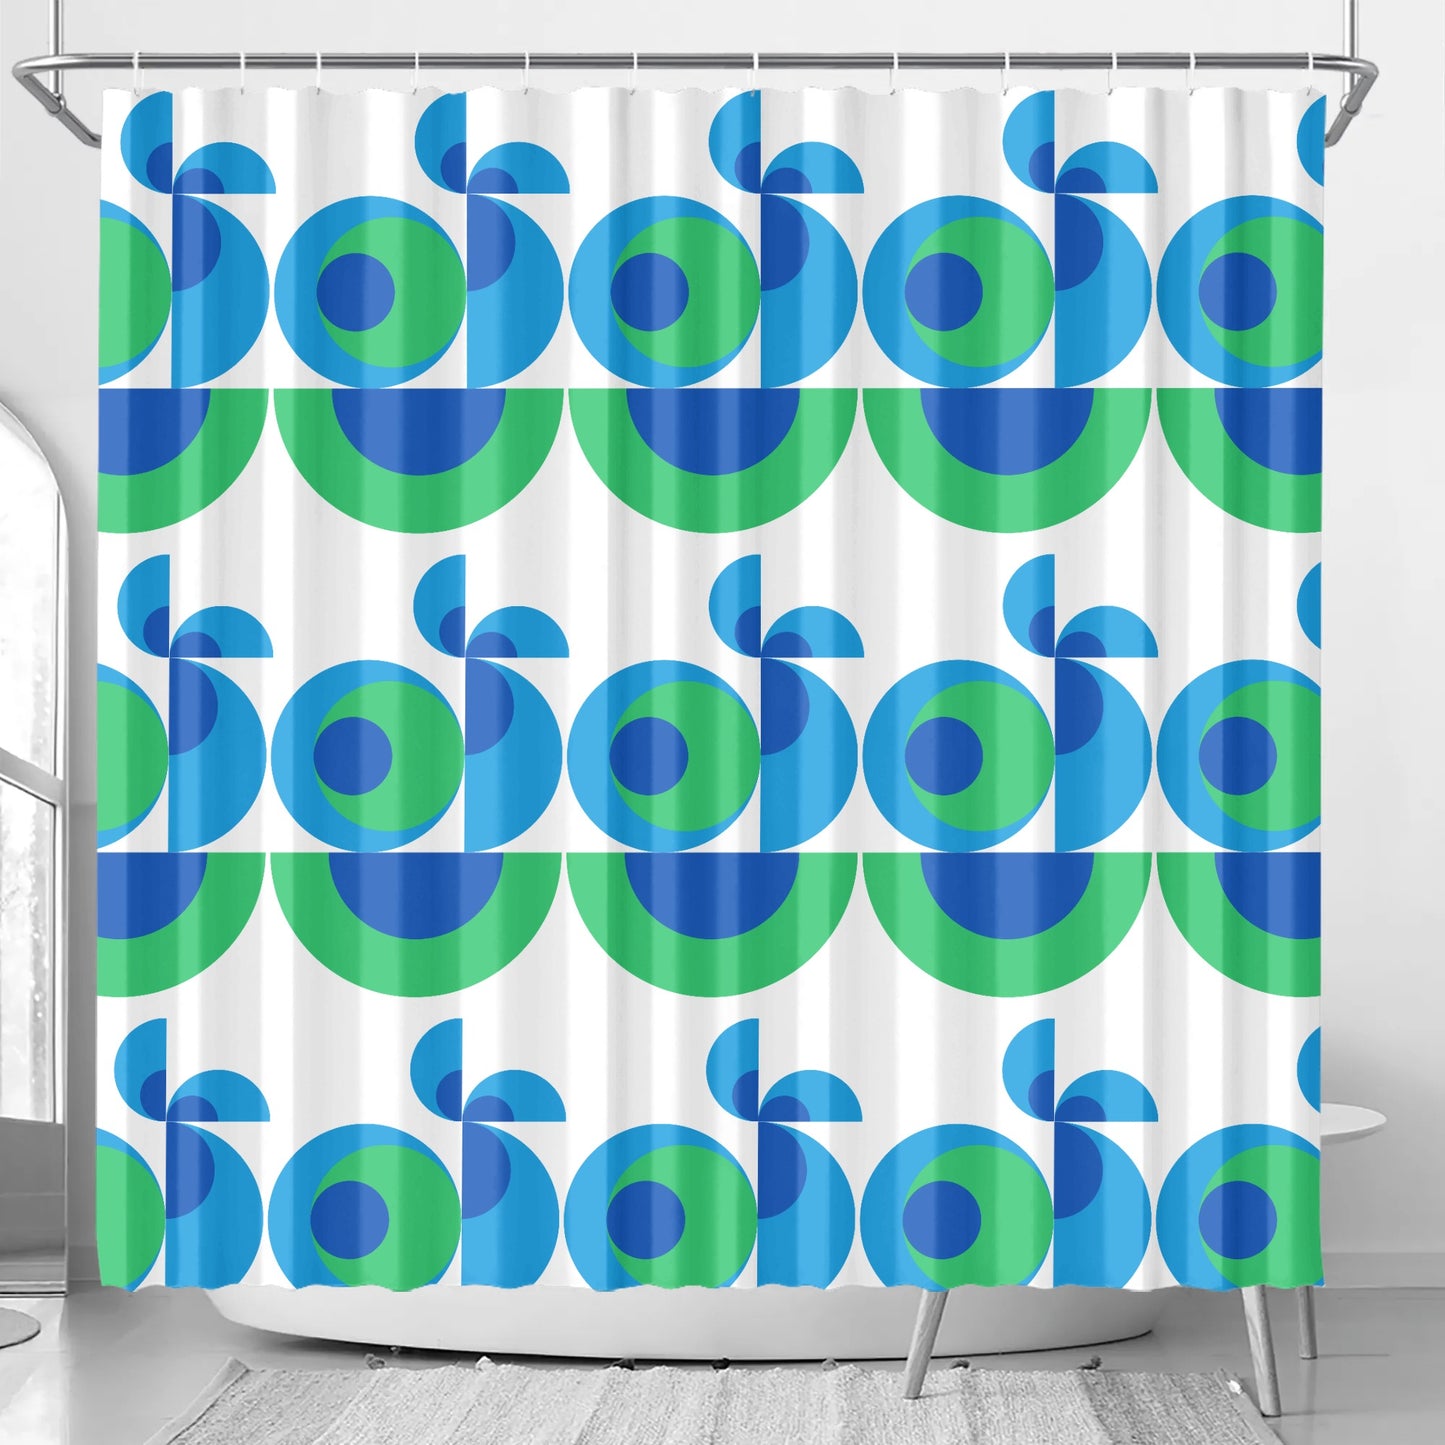 Abstract Geometric Colorful Retro Aesthetic Modern Boho Art Deco Inspired Shower Curtain